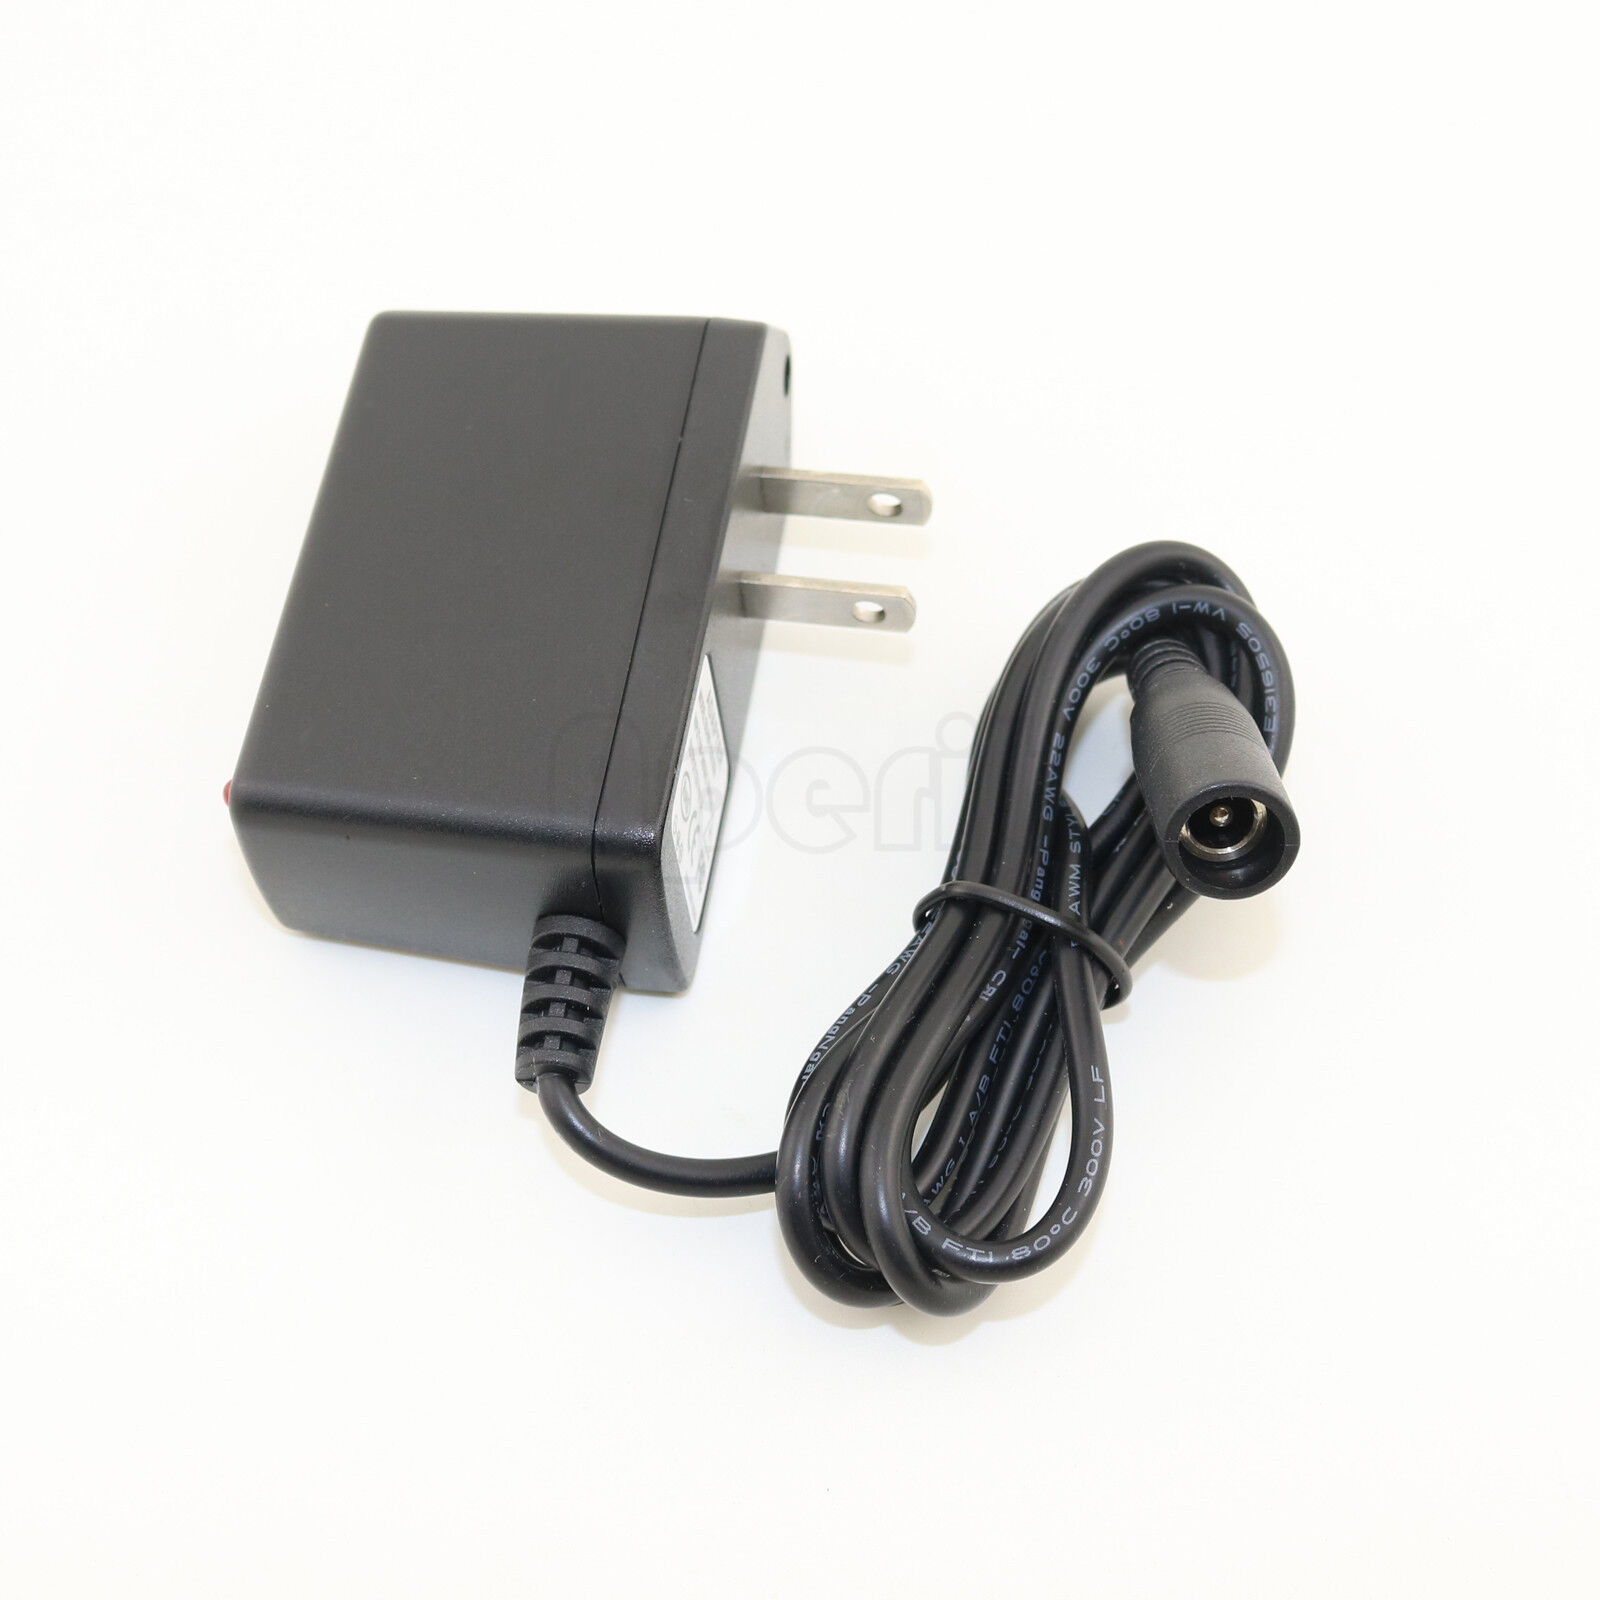 *Brand NEW*for AS501 Dell Monitor Soundbar 1A 12V AC DC Adaptor Power Supply Charger Cord